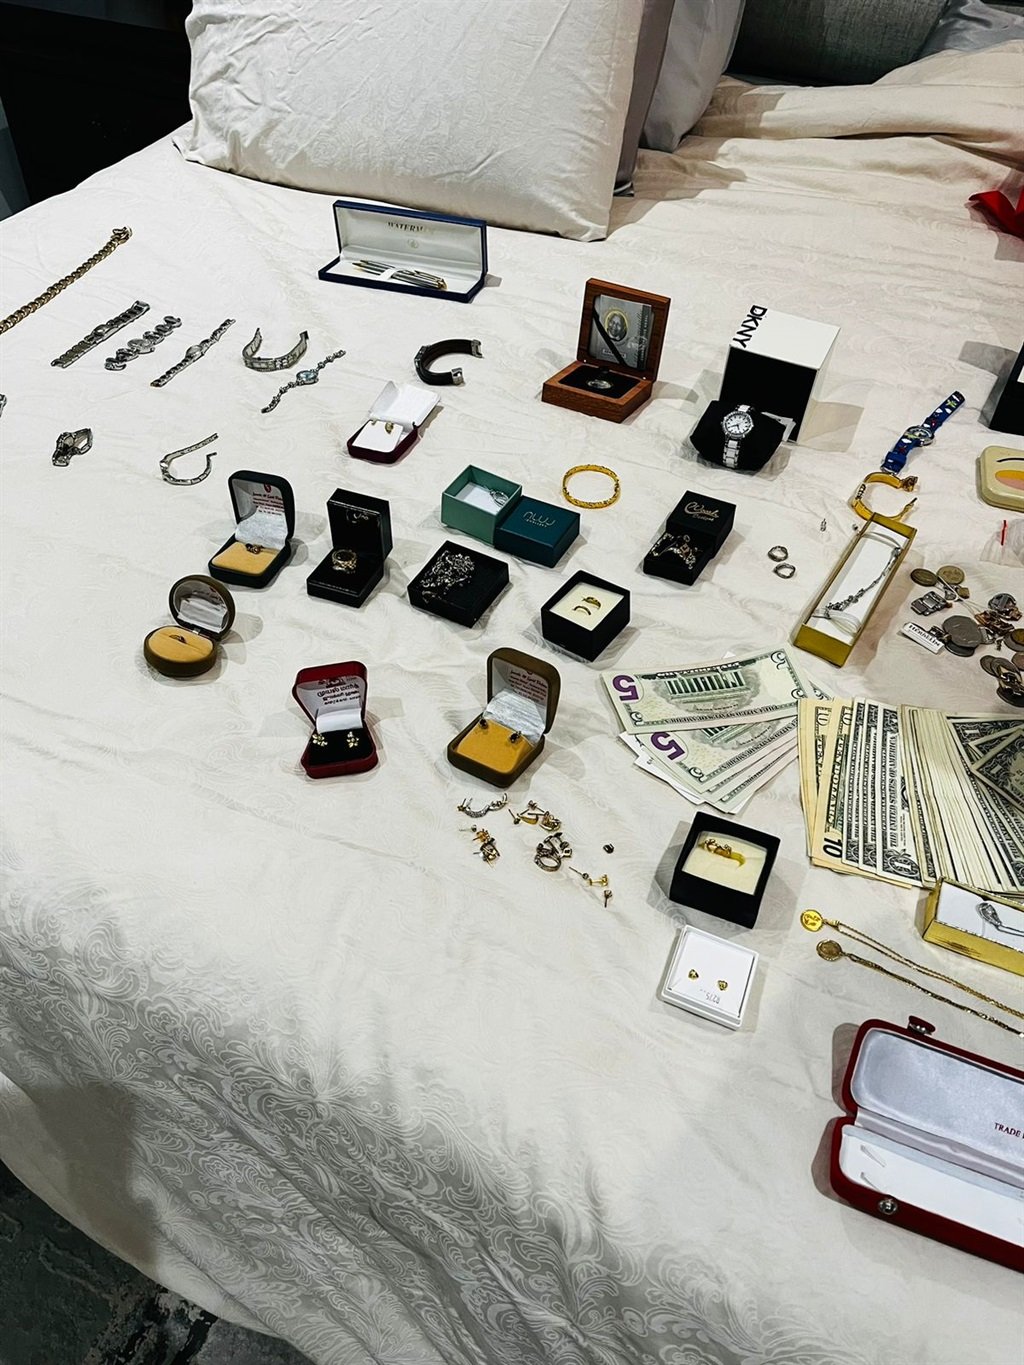 Some of the assets seized by the NPA